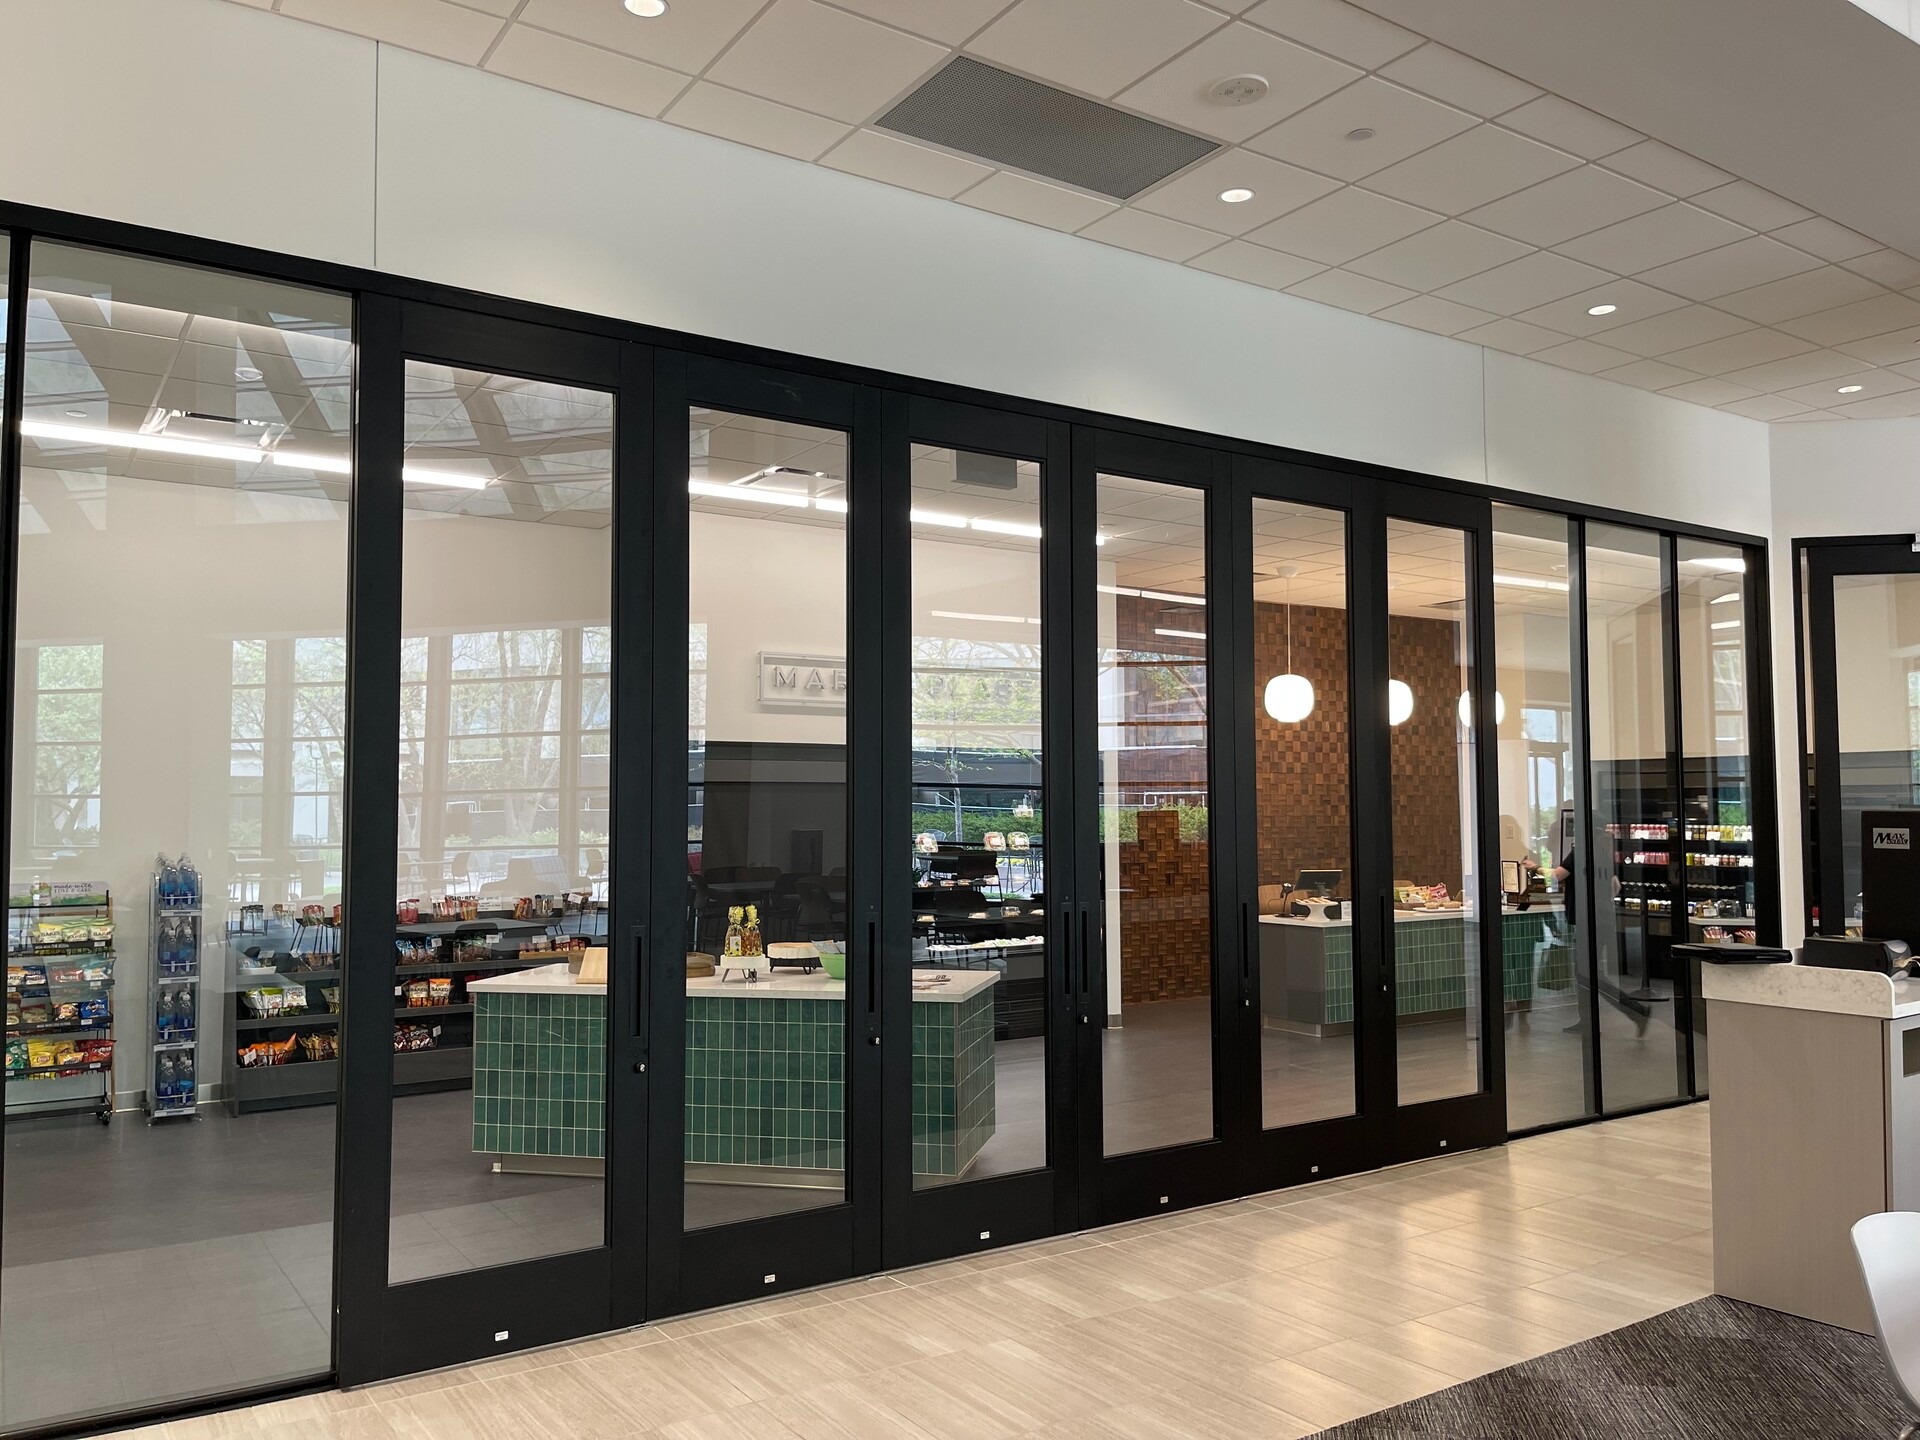 Project: OneAmerica Tower Cafe Sliding Doors